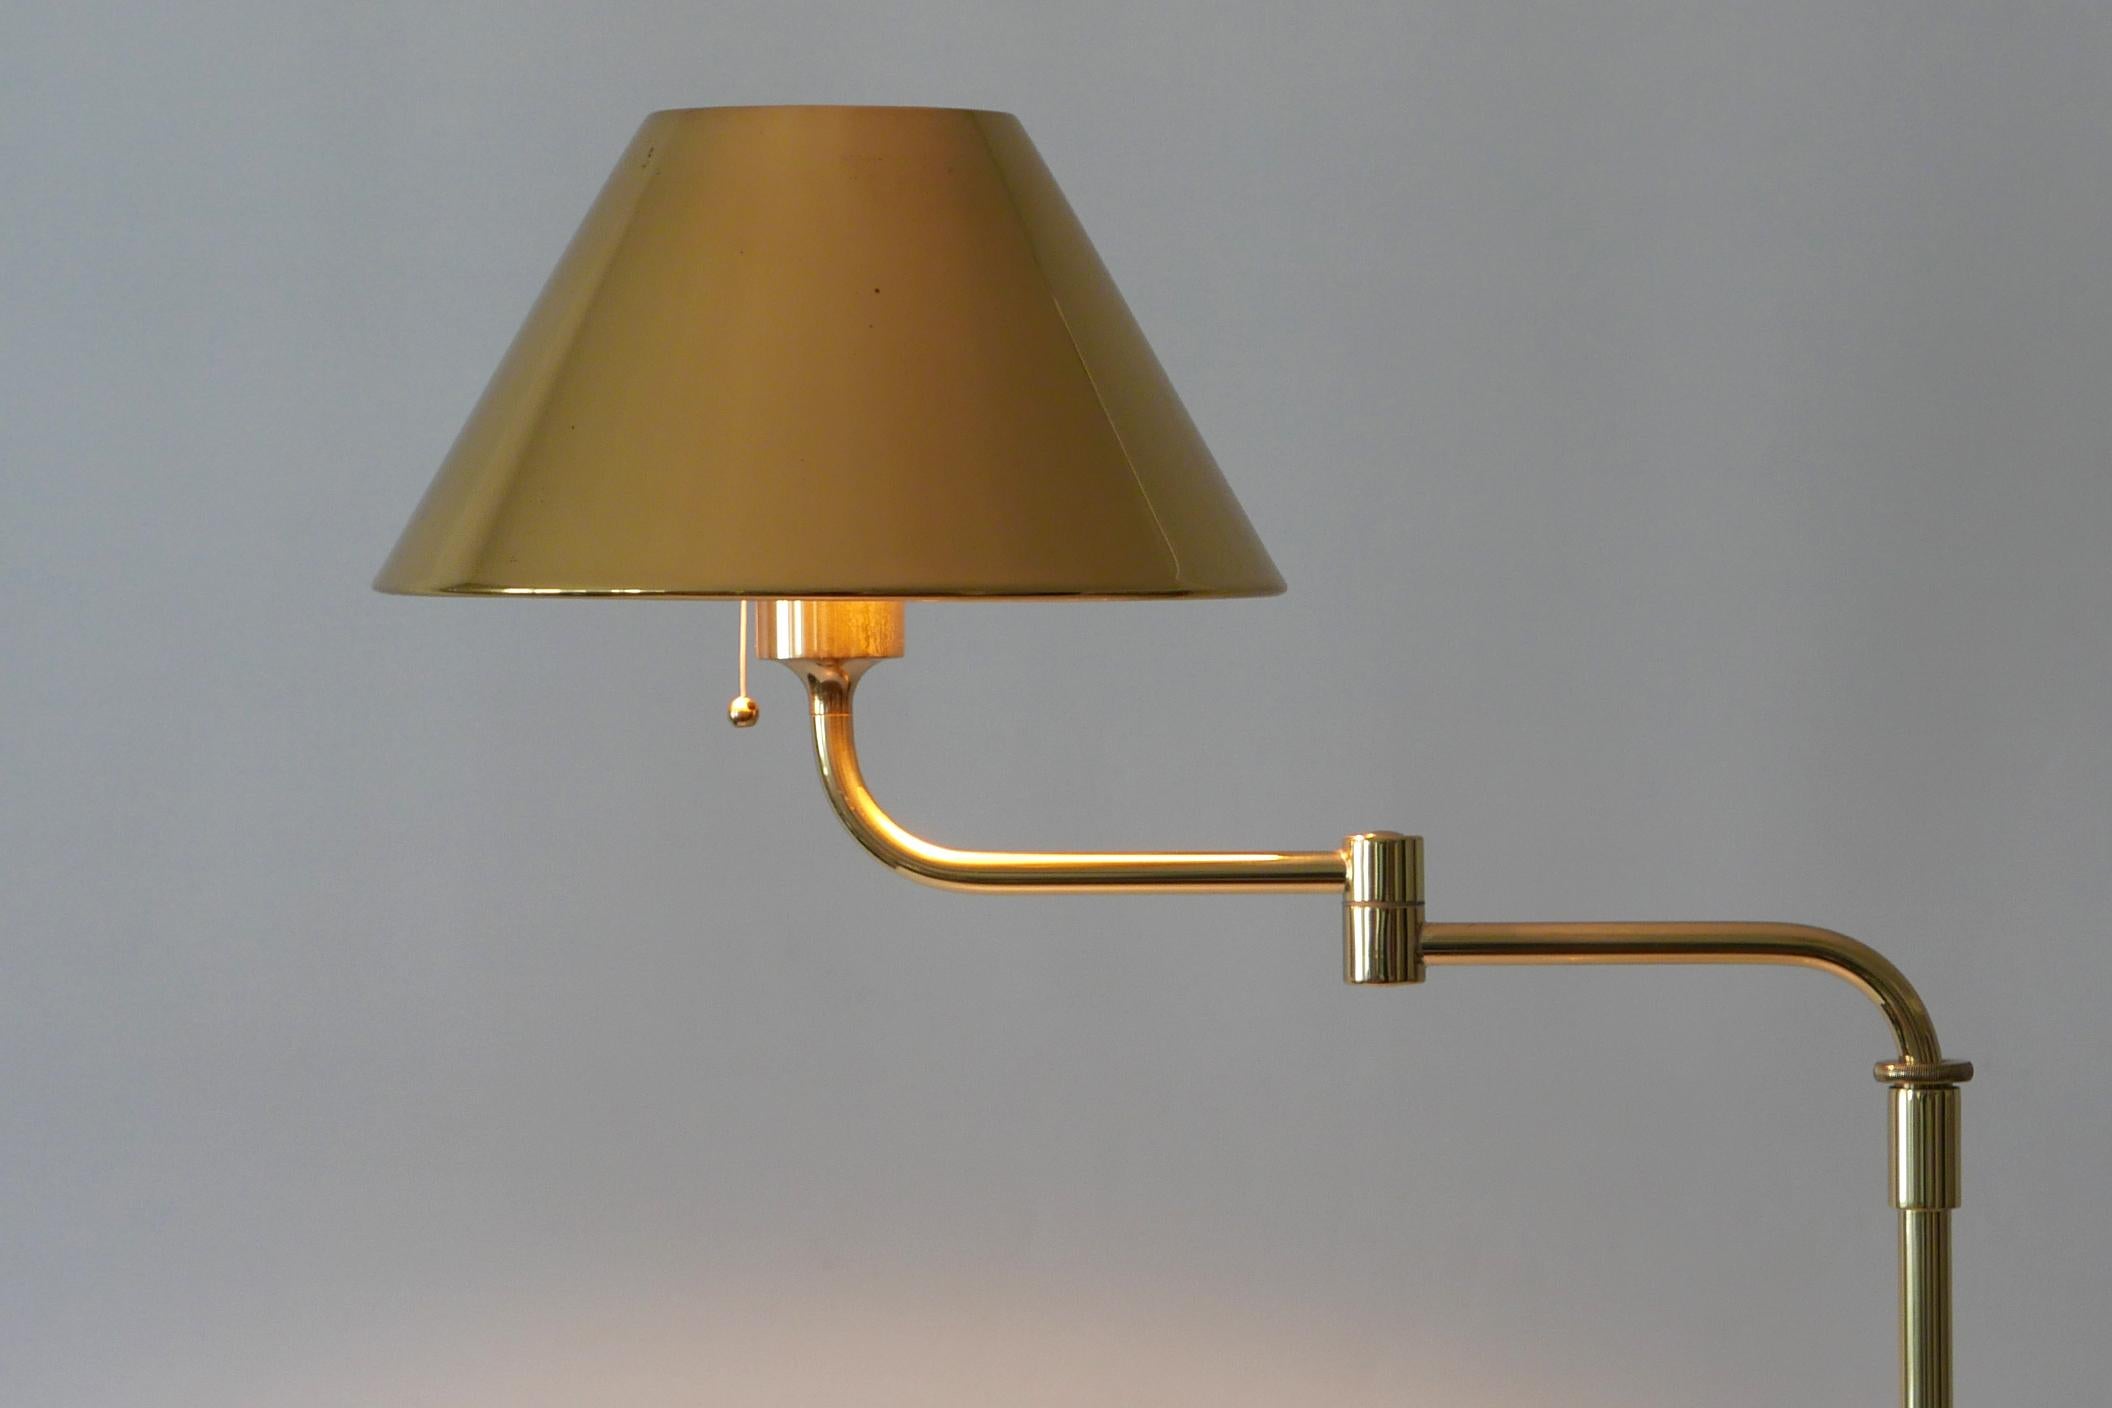 Articulated Brass Floor Lamp or Reading Light by Florian Schulz 1980s Germany 10